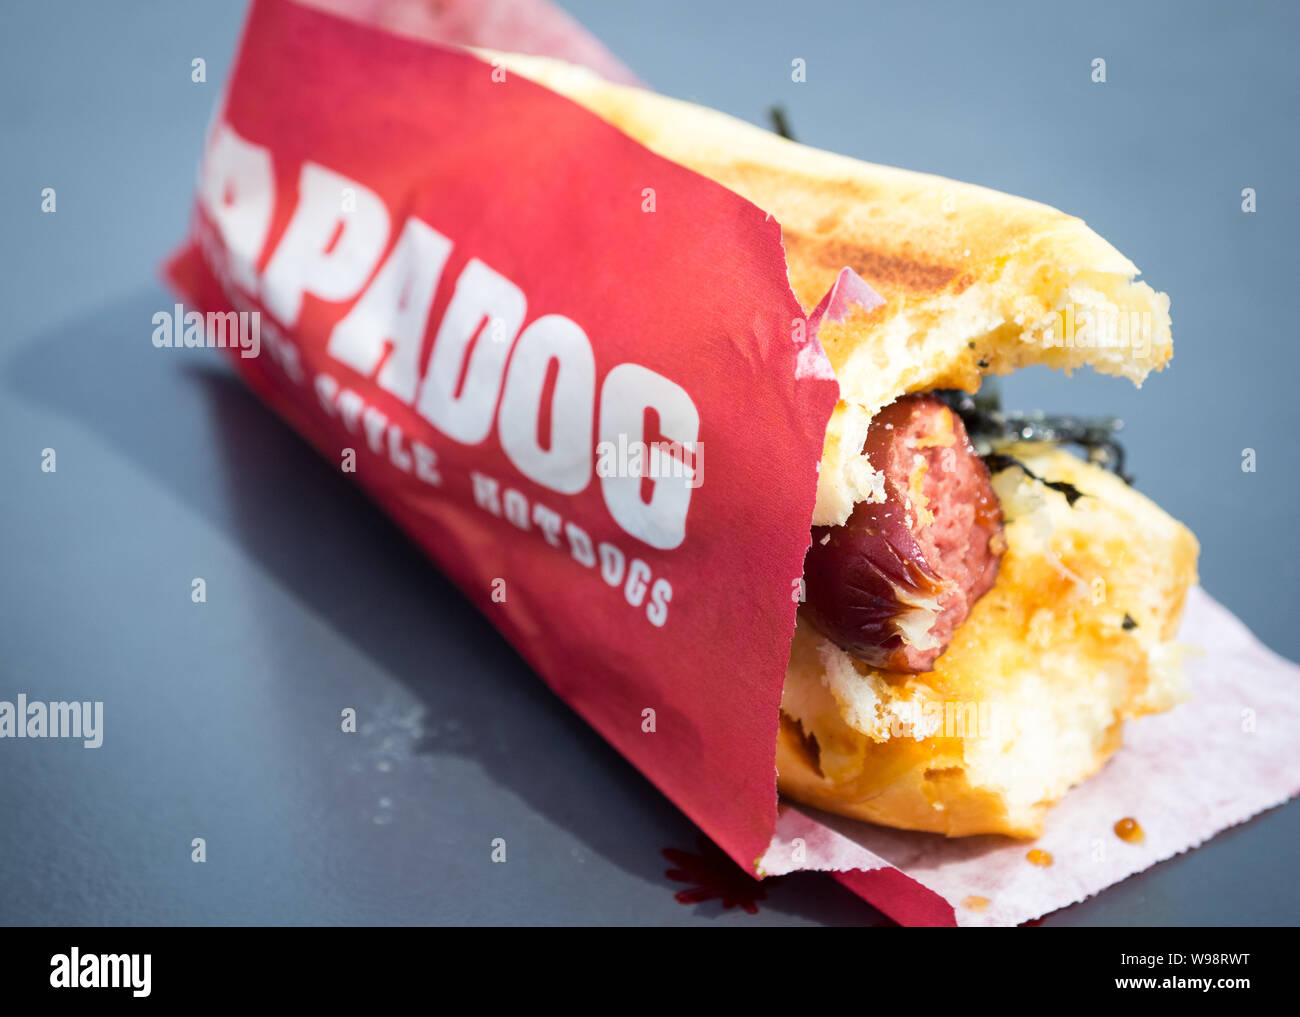 A terimayo JAPADOG, the signature hot dog of JAPADOG, a popular small chain of hot dog stands based in Vancouver, British Columbia, Canada. Stock Photo